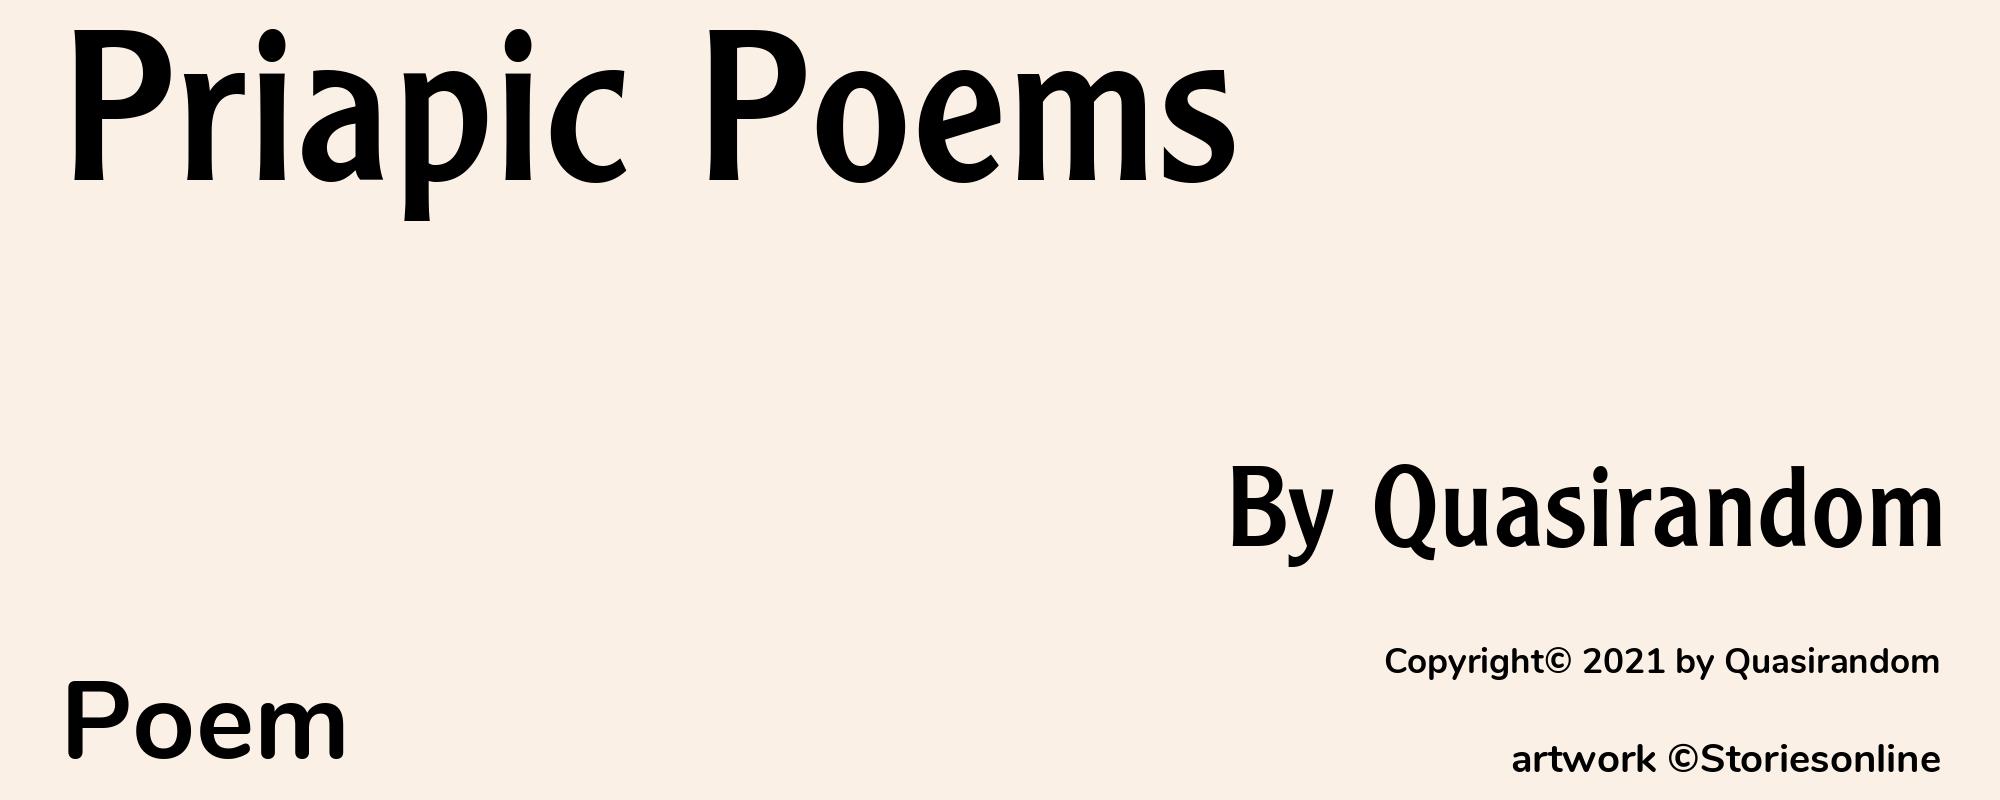 Priapic Poems - Cover